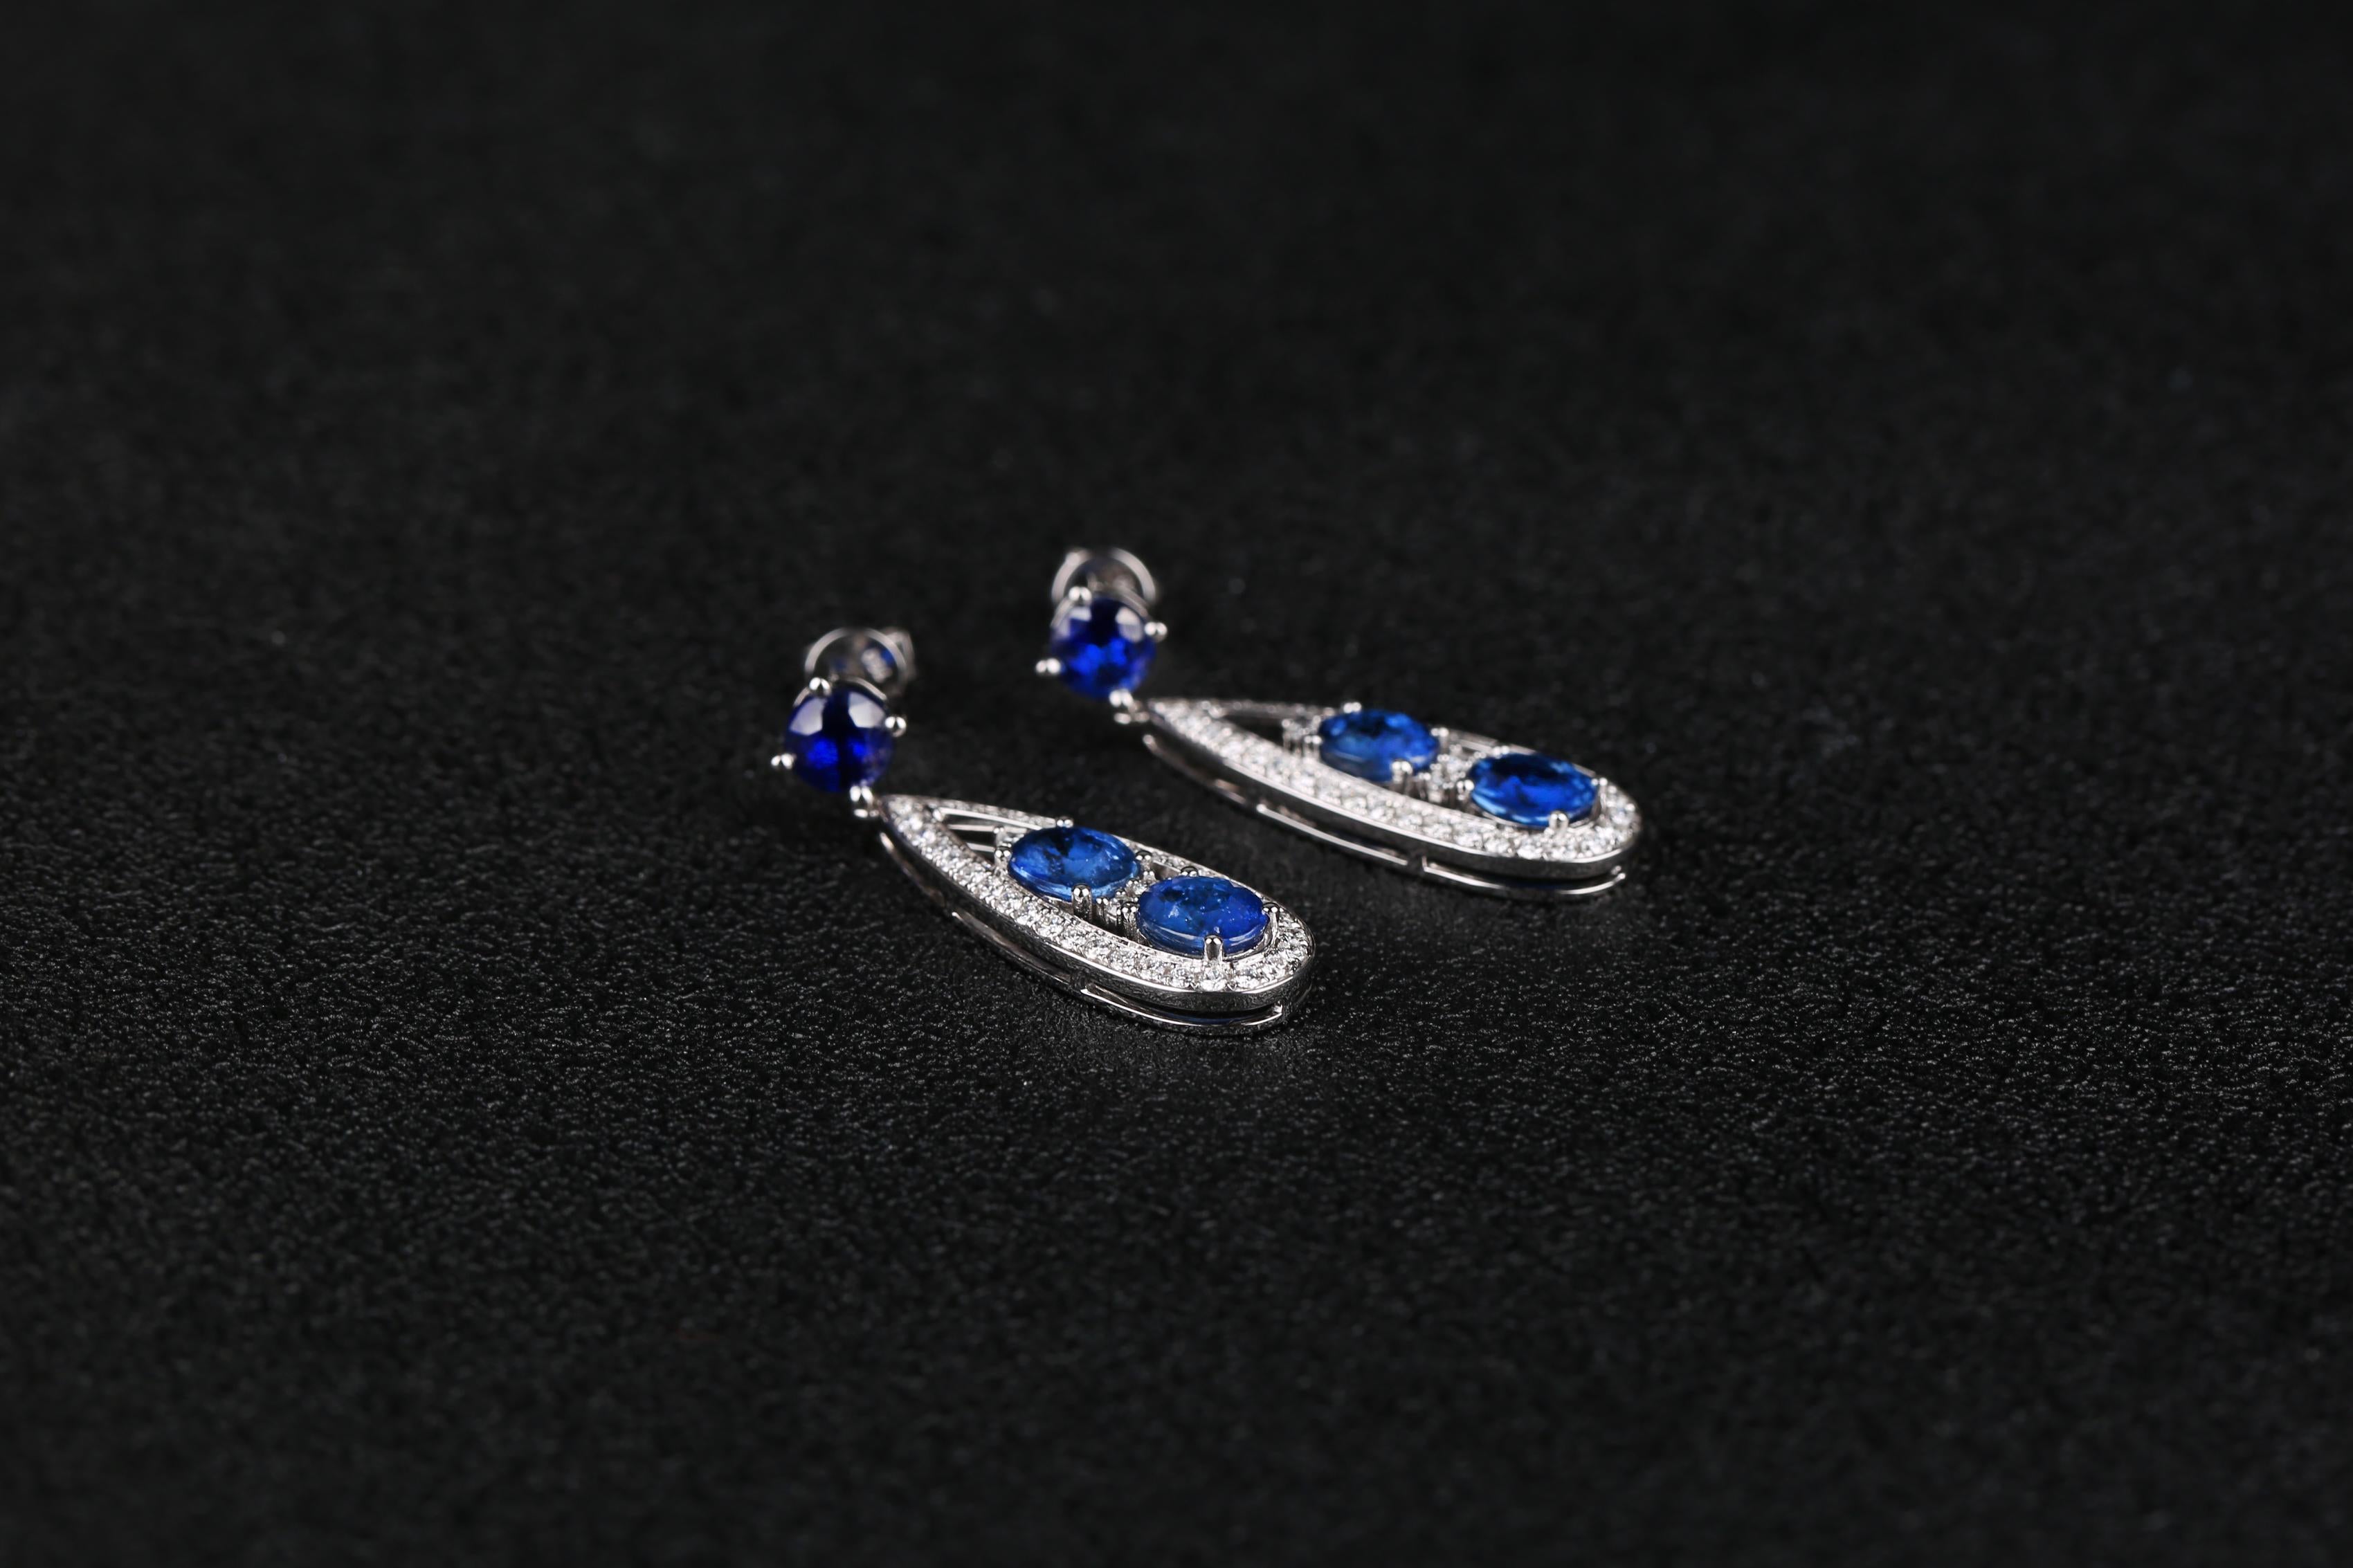 A Pair of Sapphire dangle drop earring in 18K White Gold. The elongated rain drop is suspended below a Sapphire ear stud. There are 2 sapphire sitting in each side of the rain drop and they are surrounded by diamond pave. It is a very contemporary